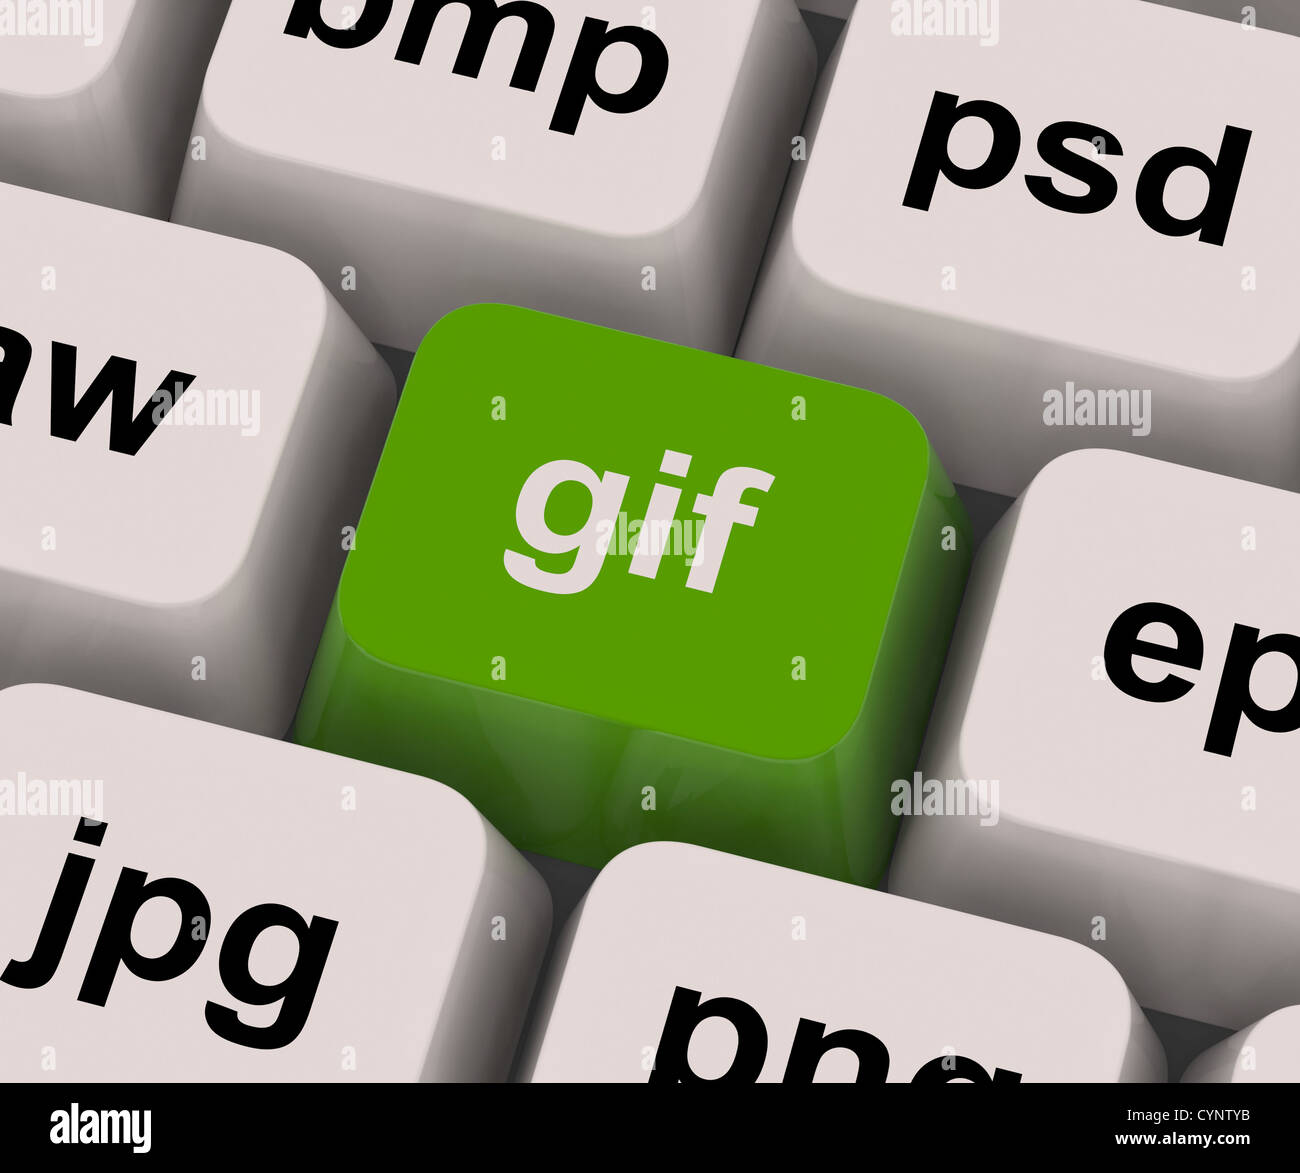 Gif Key Showing Image Format For Internet Pictures Stock Photo